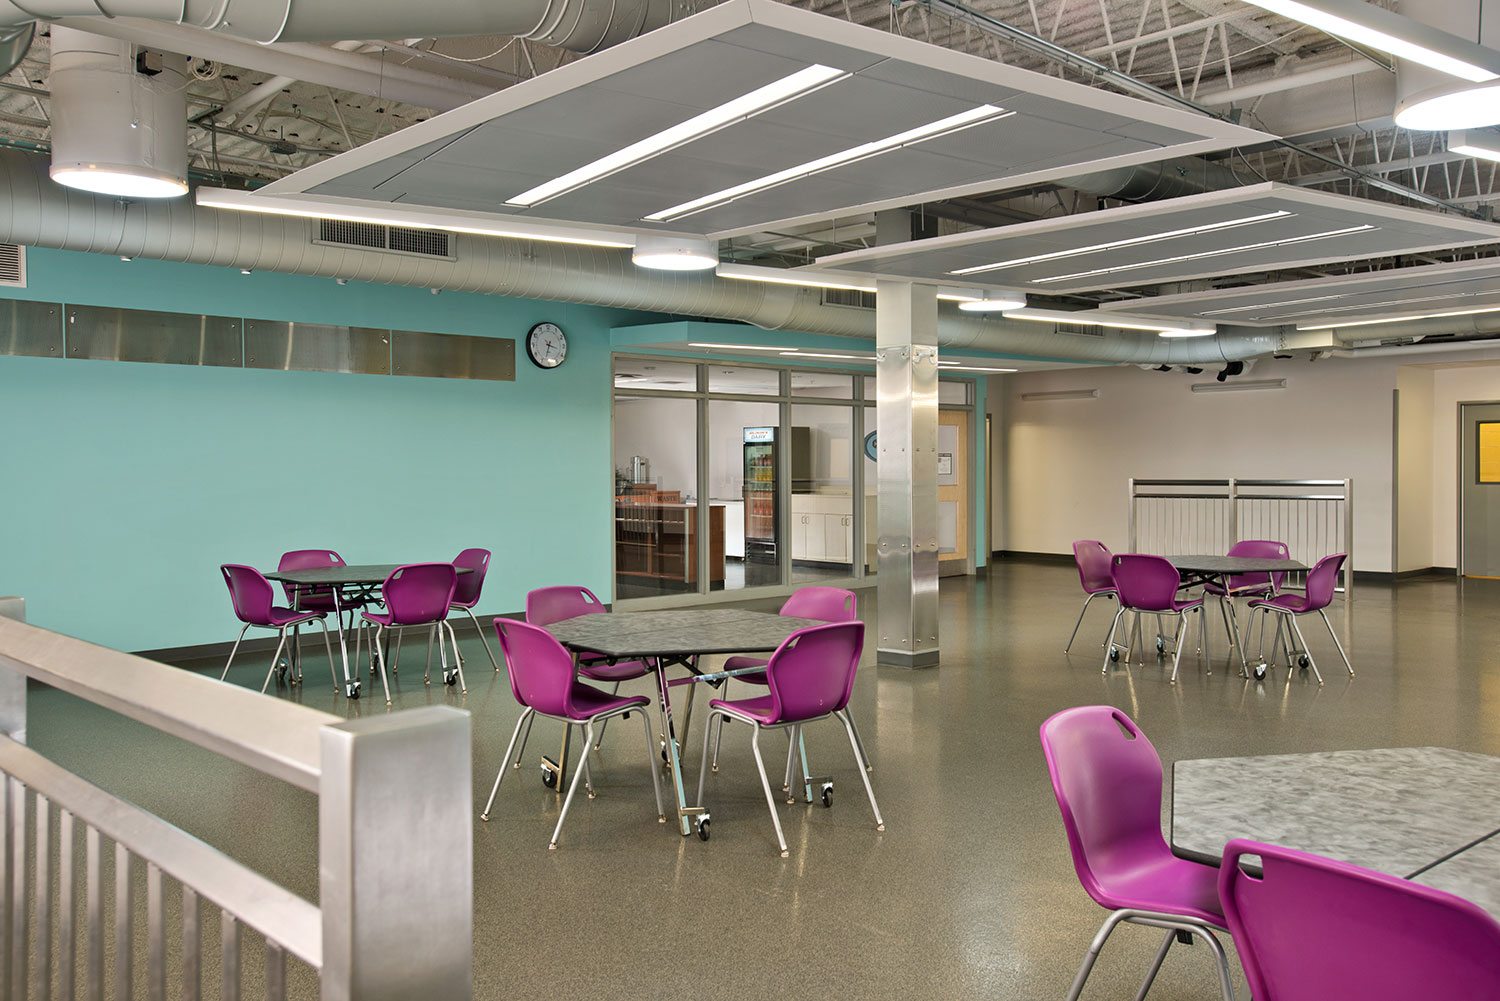 Mosaic's feasibility study and design added another 10,000 square feet to BOCES for common areas and corridors to connect the building wings throughout the campus to improve student circulation and safety.